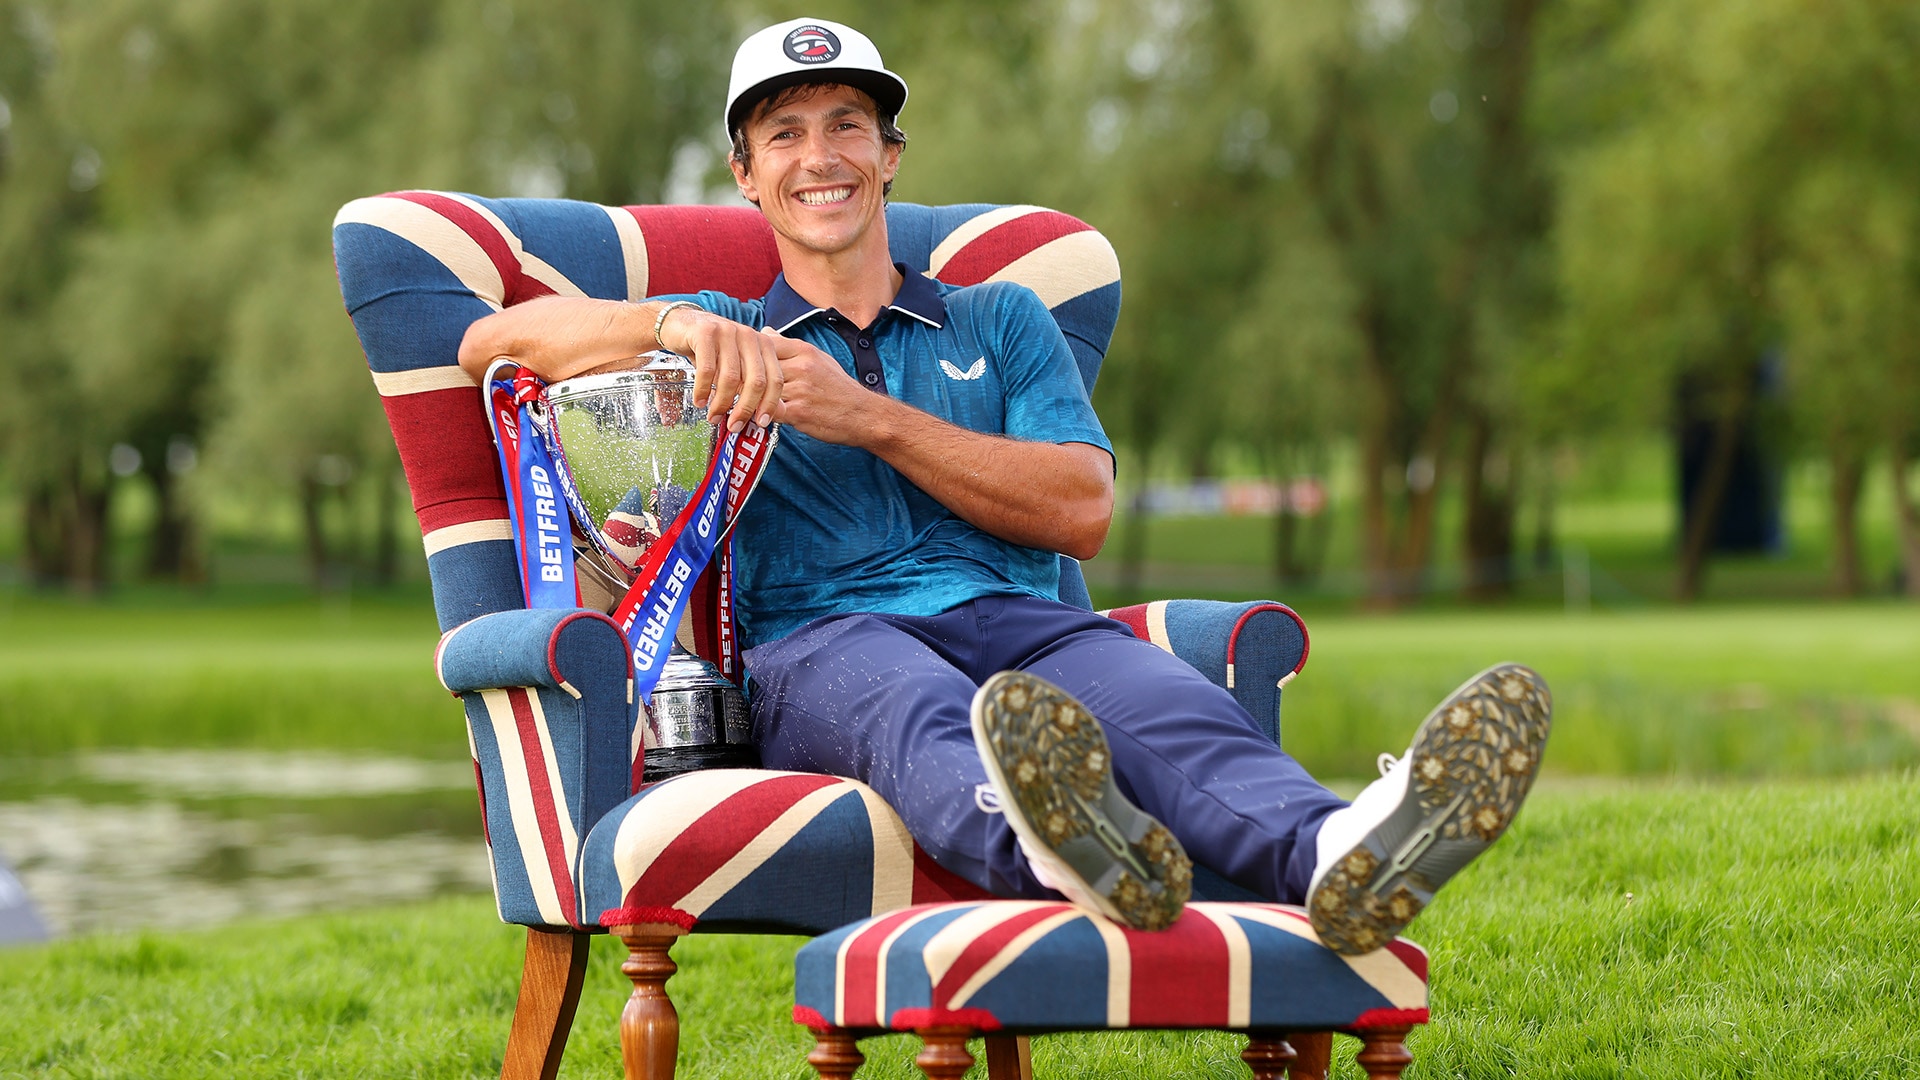 After years of turmoil, Thorbjorn Olesen wins British Masters title